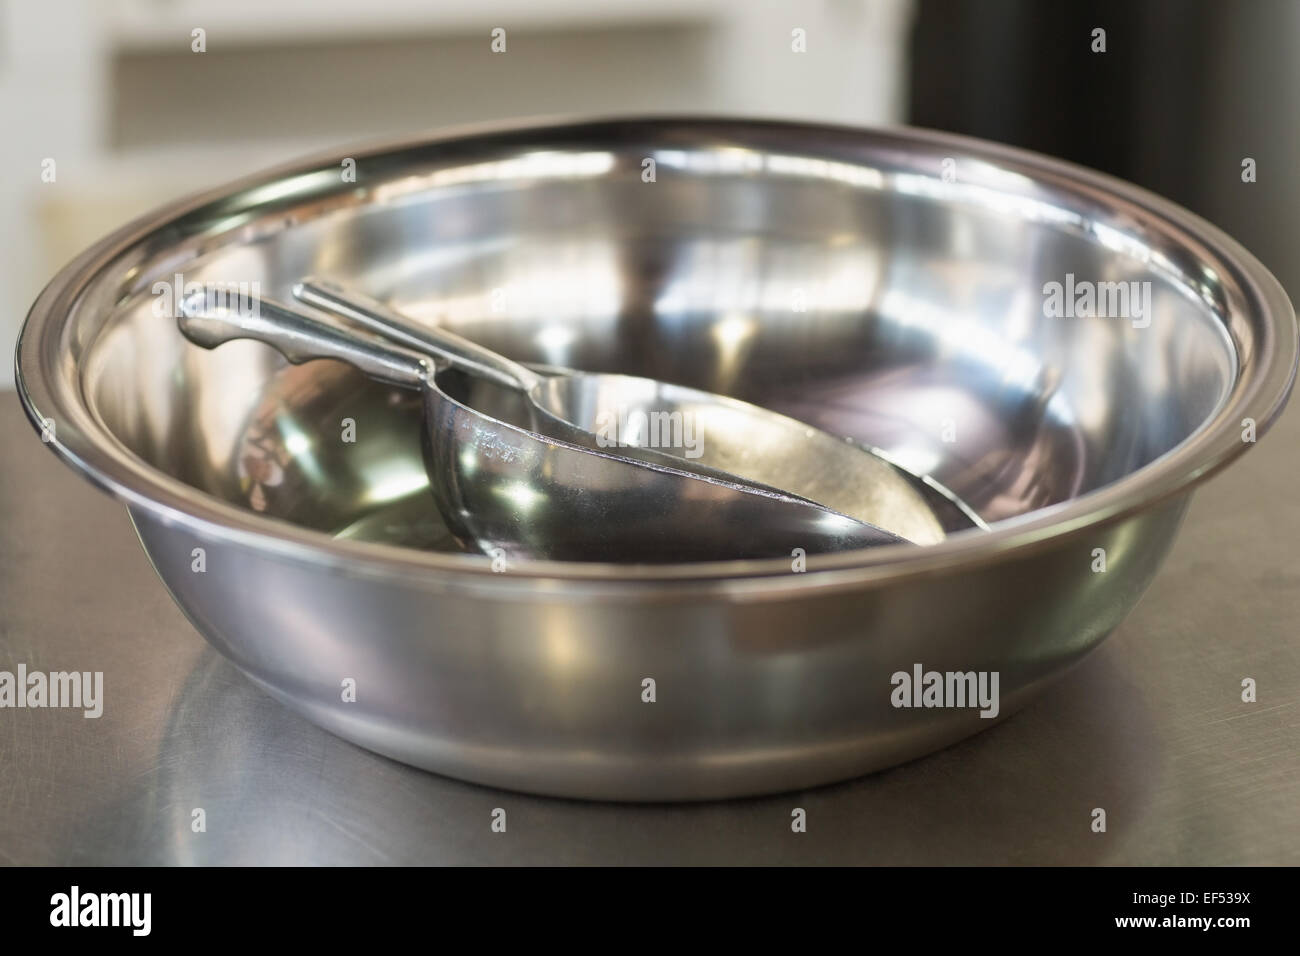 https://c8.alamy.com/comp/EF539X/mixing-bowls-and-scoops-on-counter-EF539X.jpg